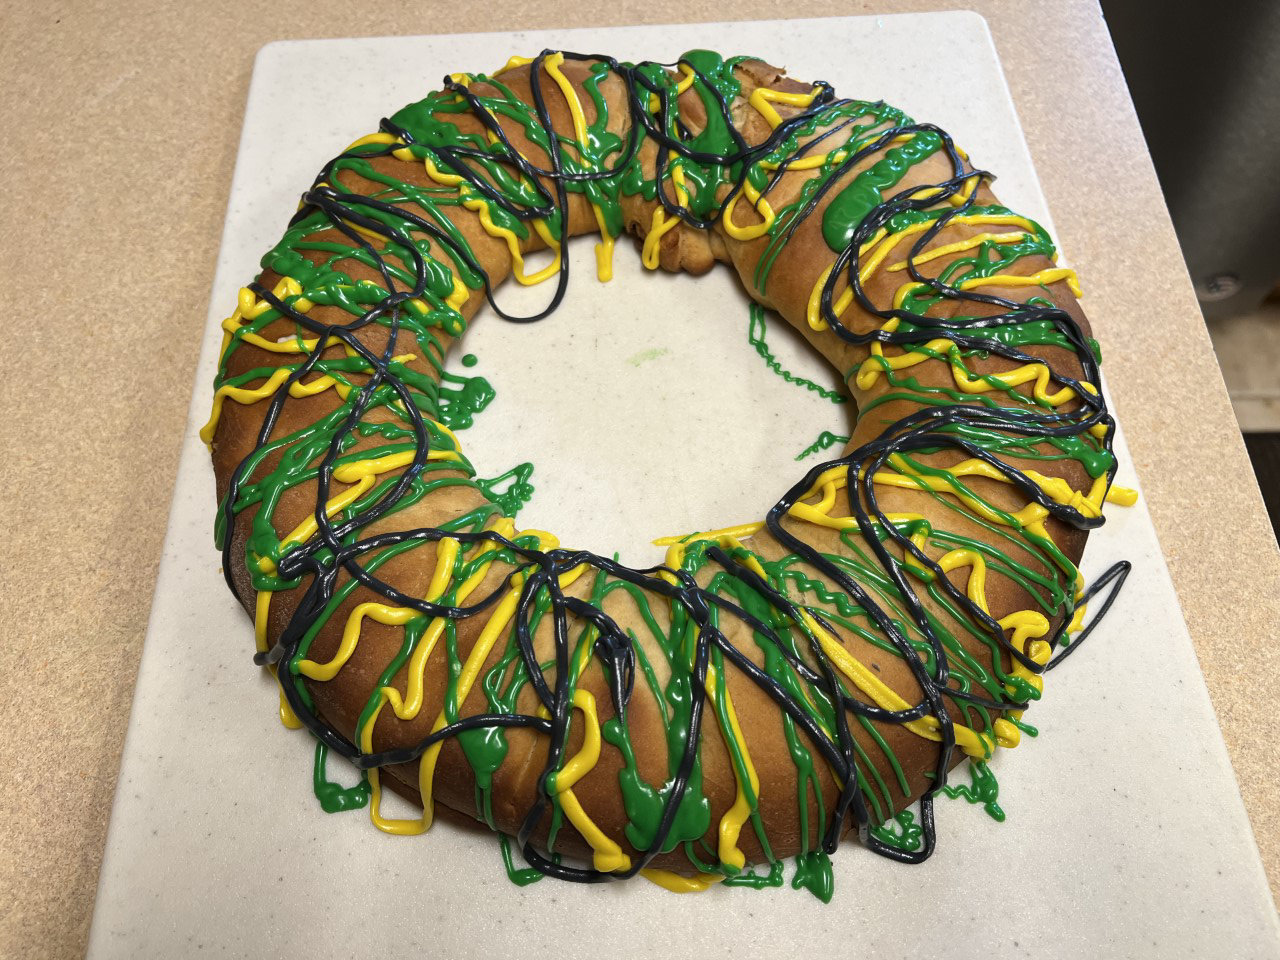 King Cakes are decorated with purple, gold (or yellow) and green icing